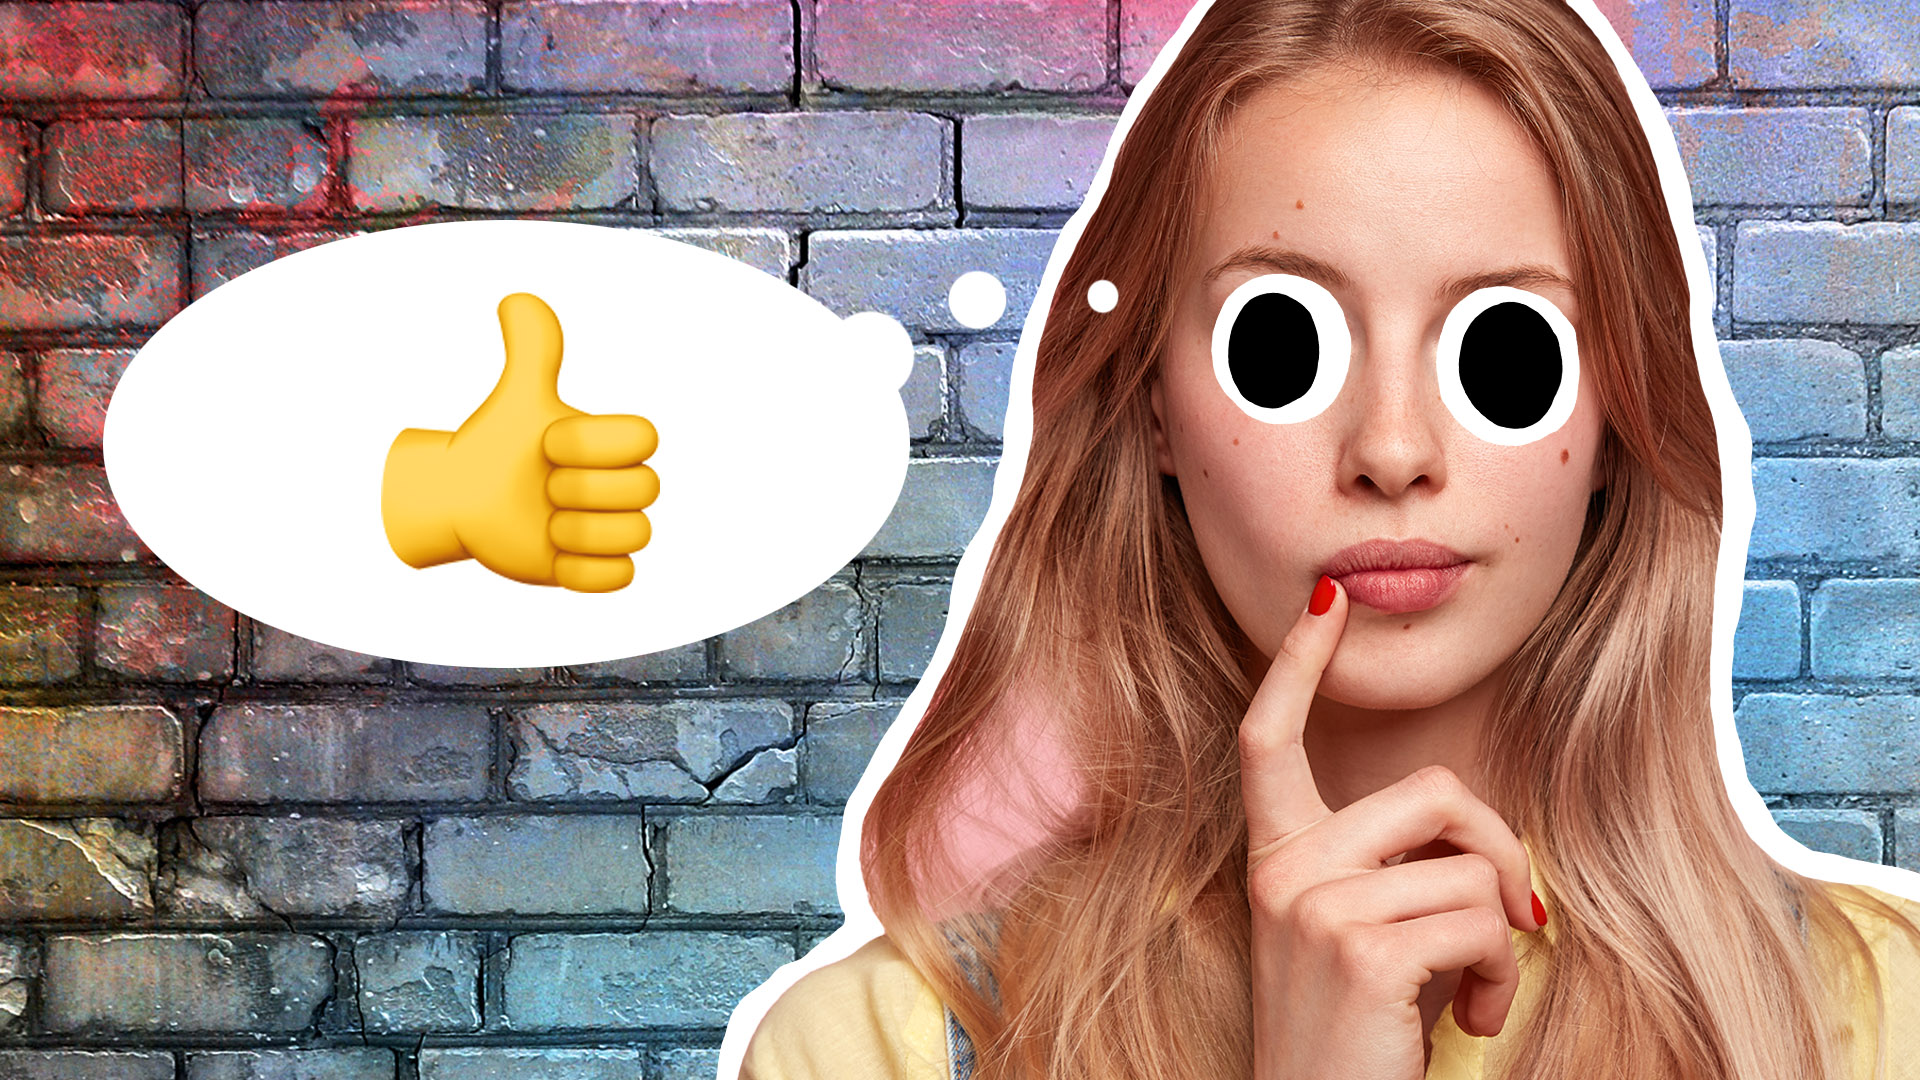 A woman with a thumbs up emoji in a thought bubble